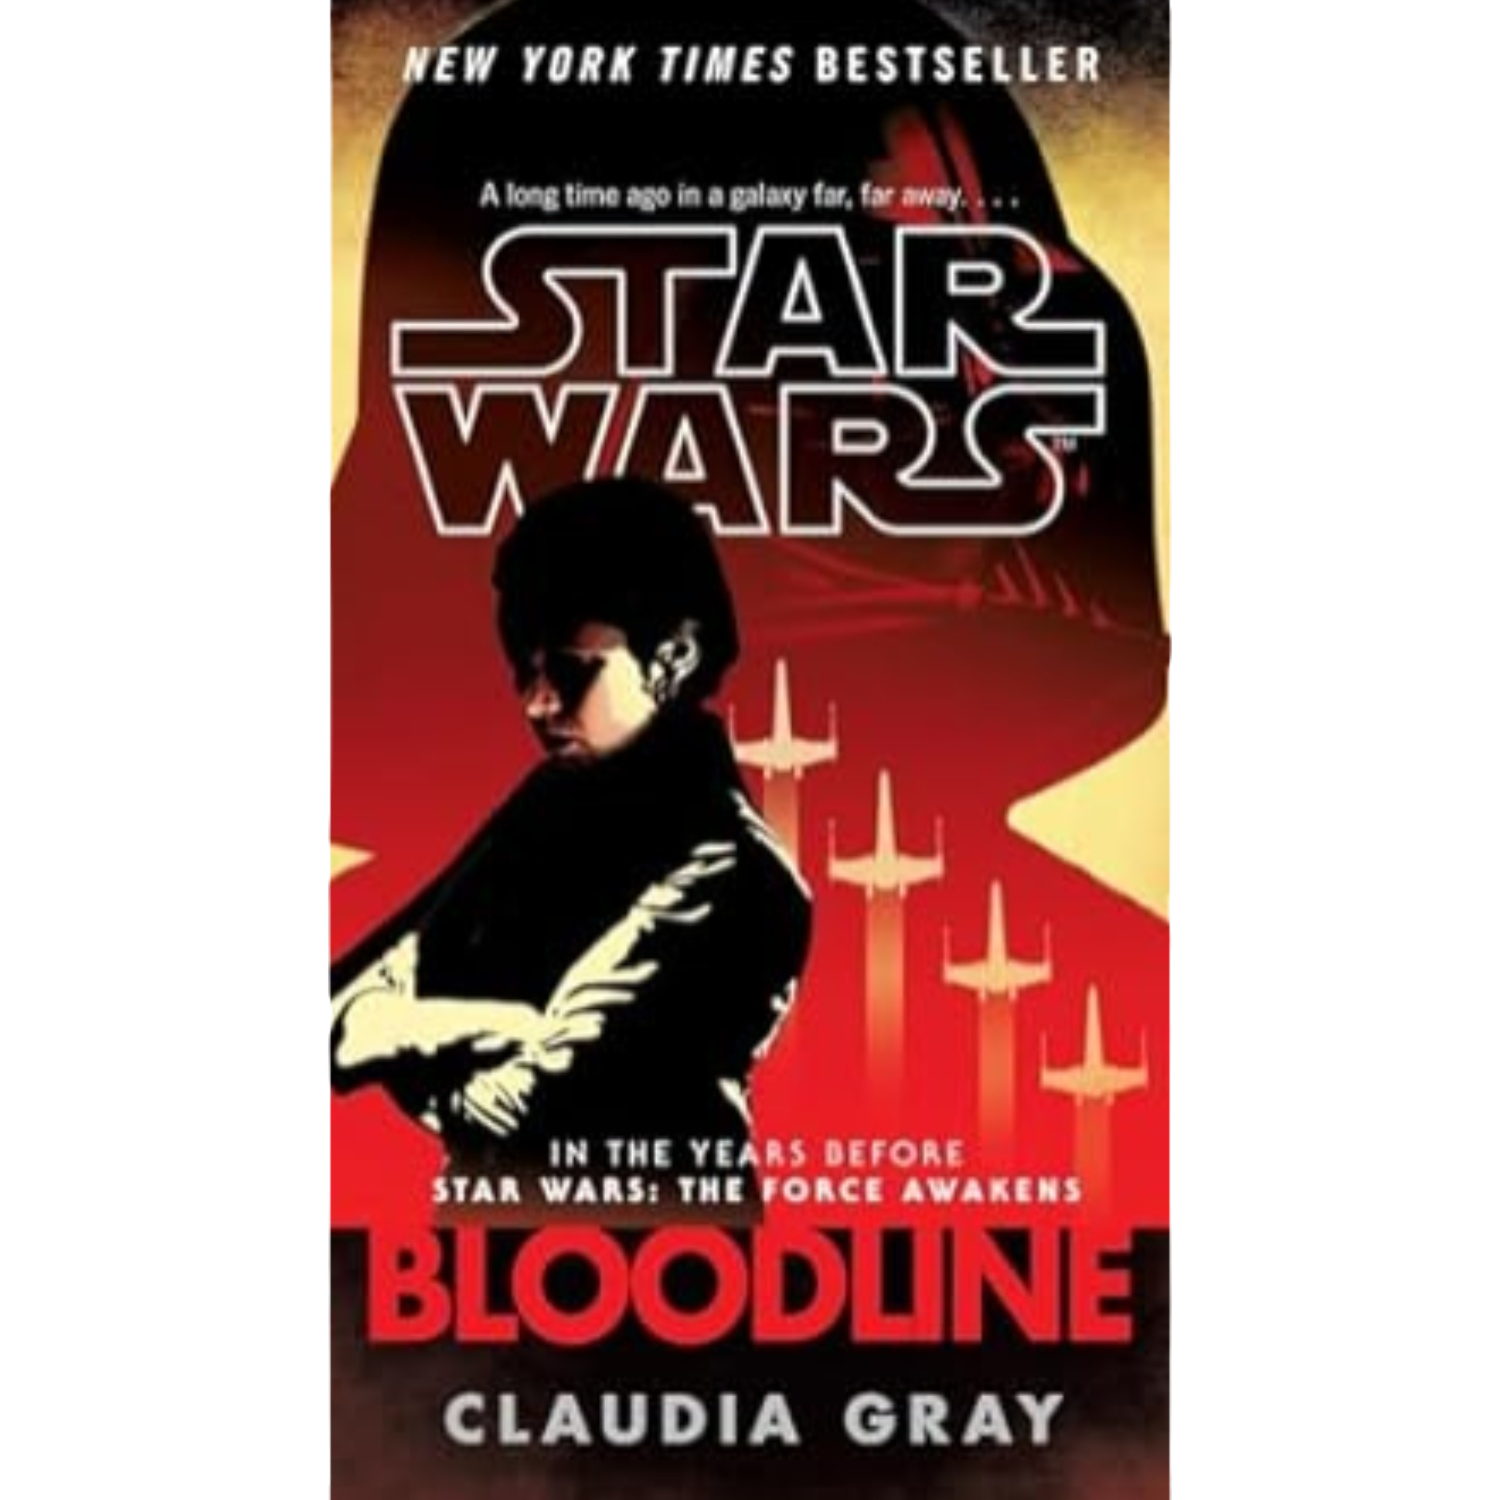 Star Wars Bloodline by Claudia Gray (2016)